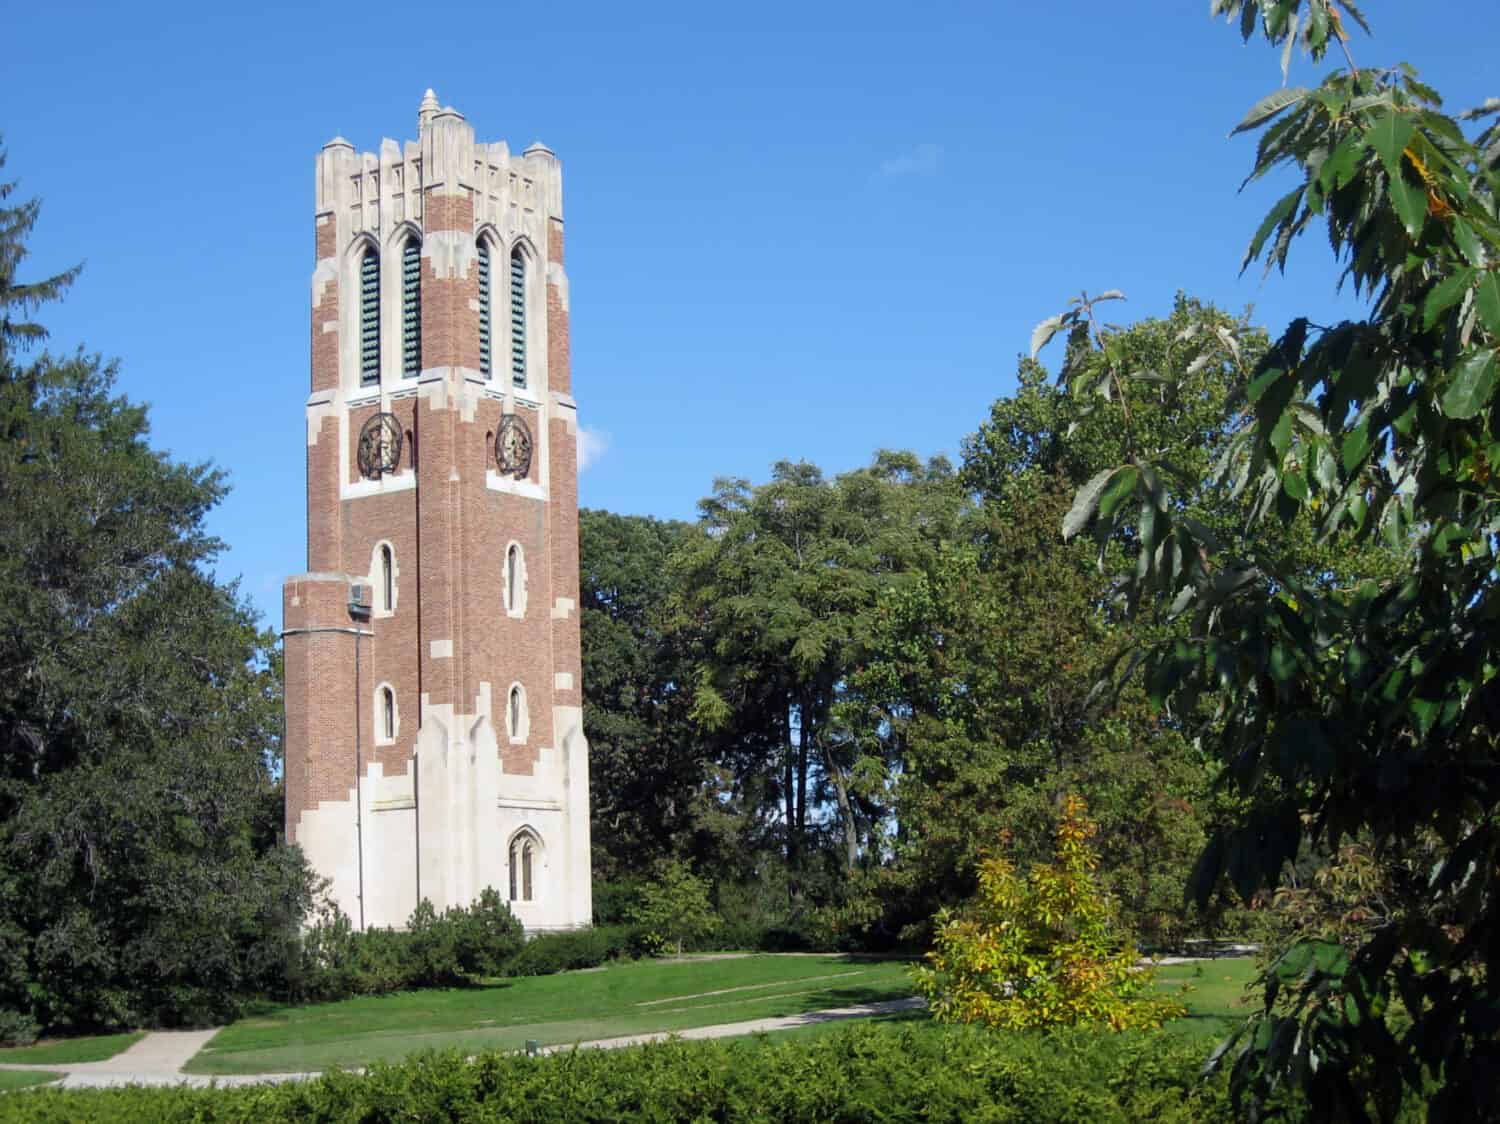 Beaumont Tower, Michigan State